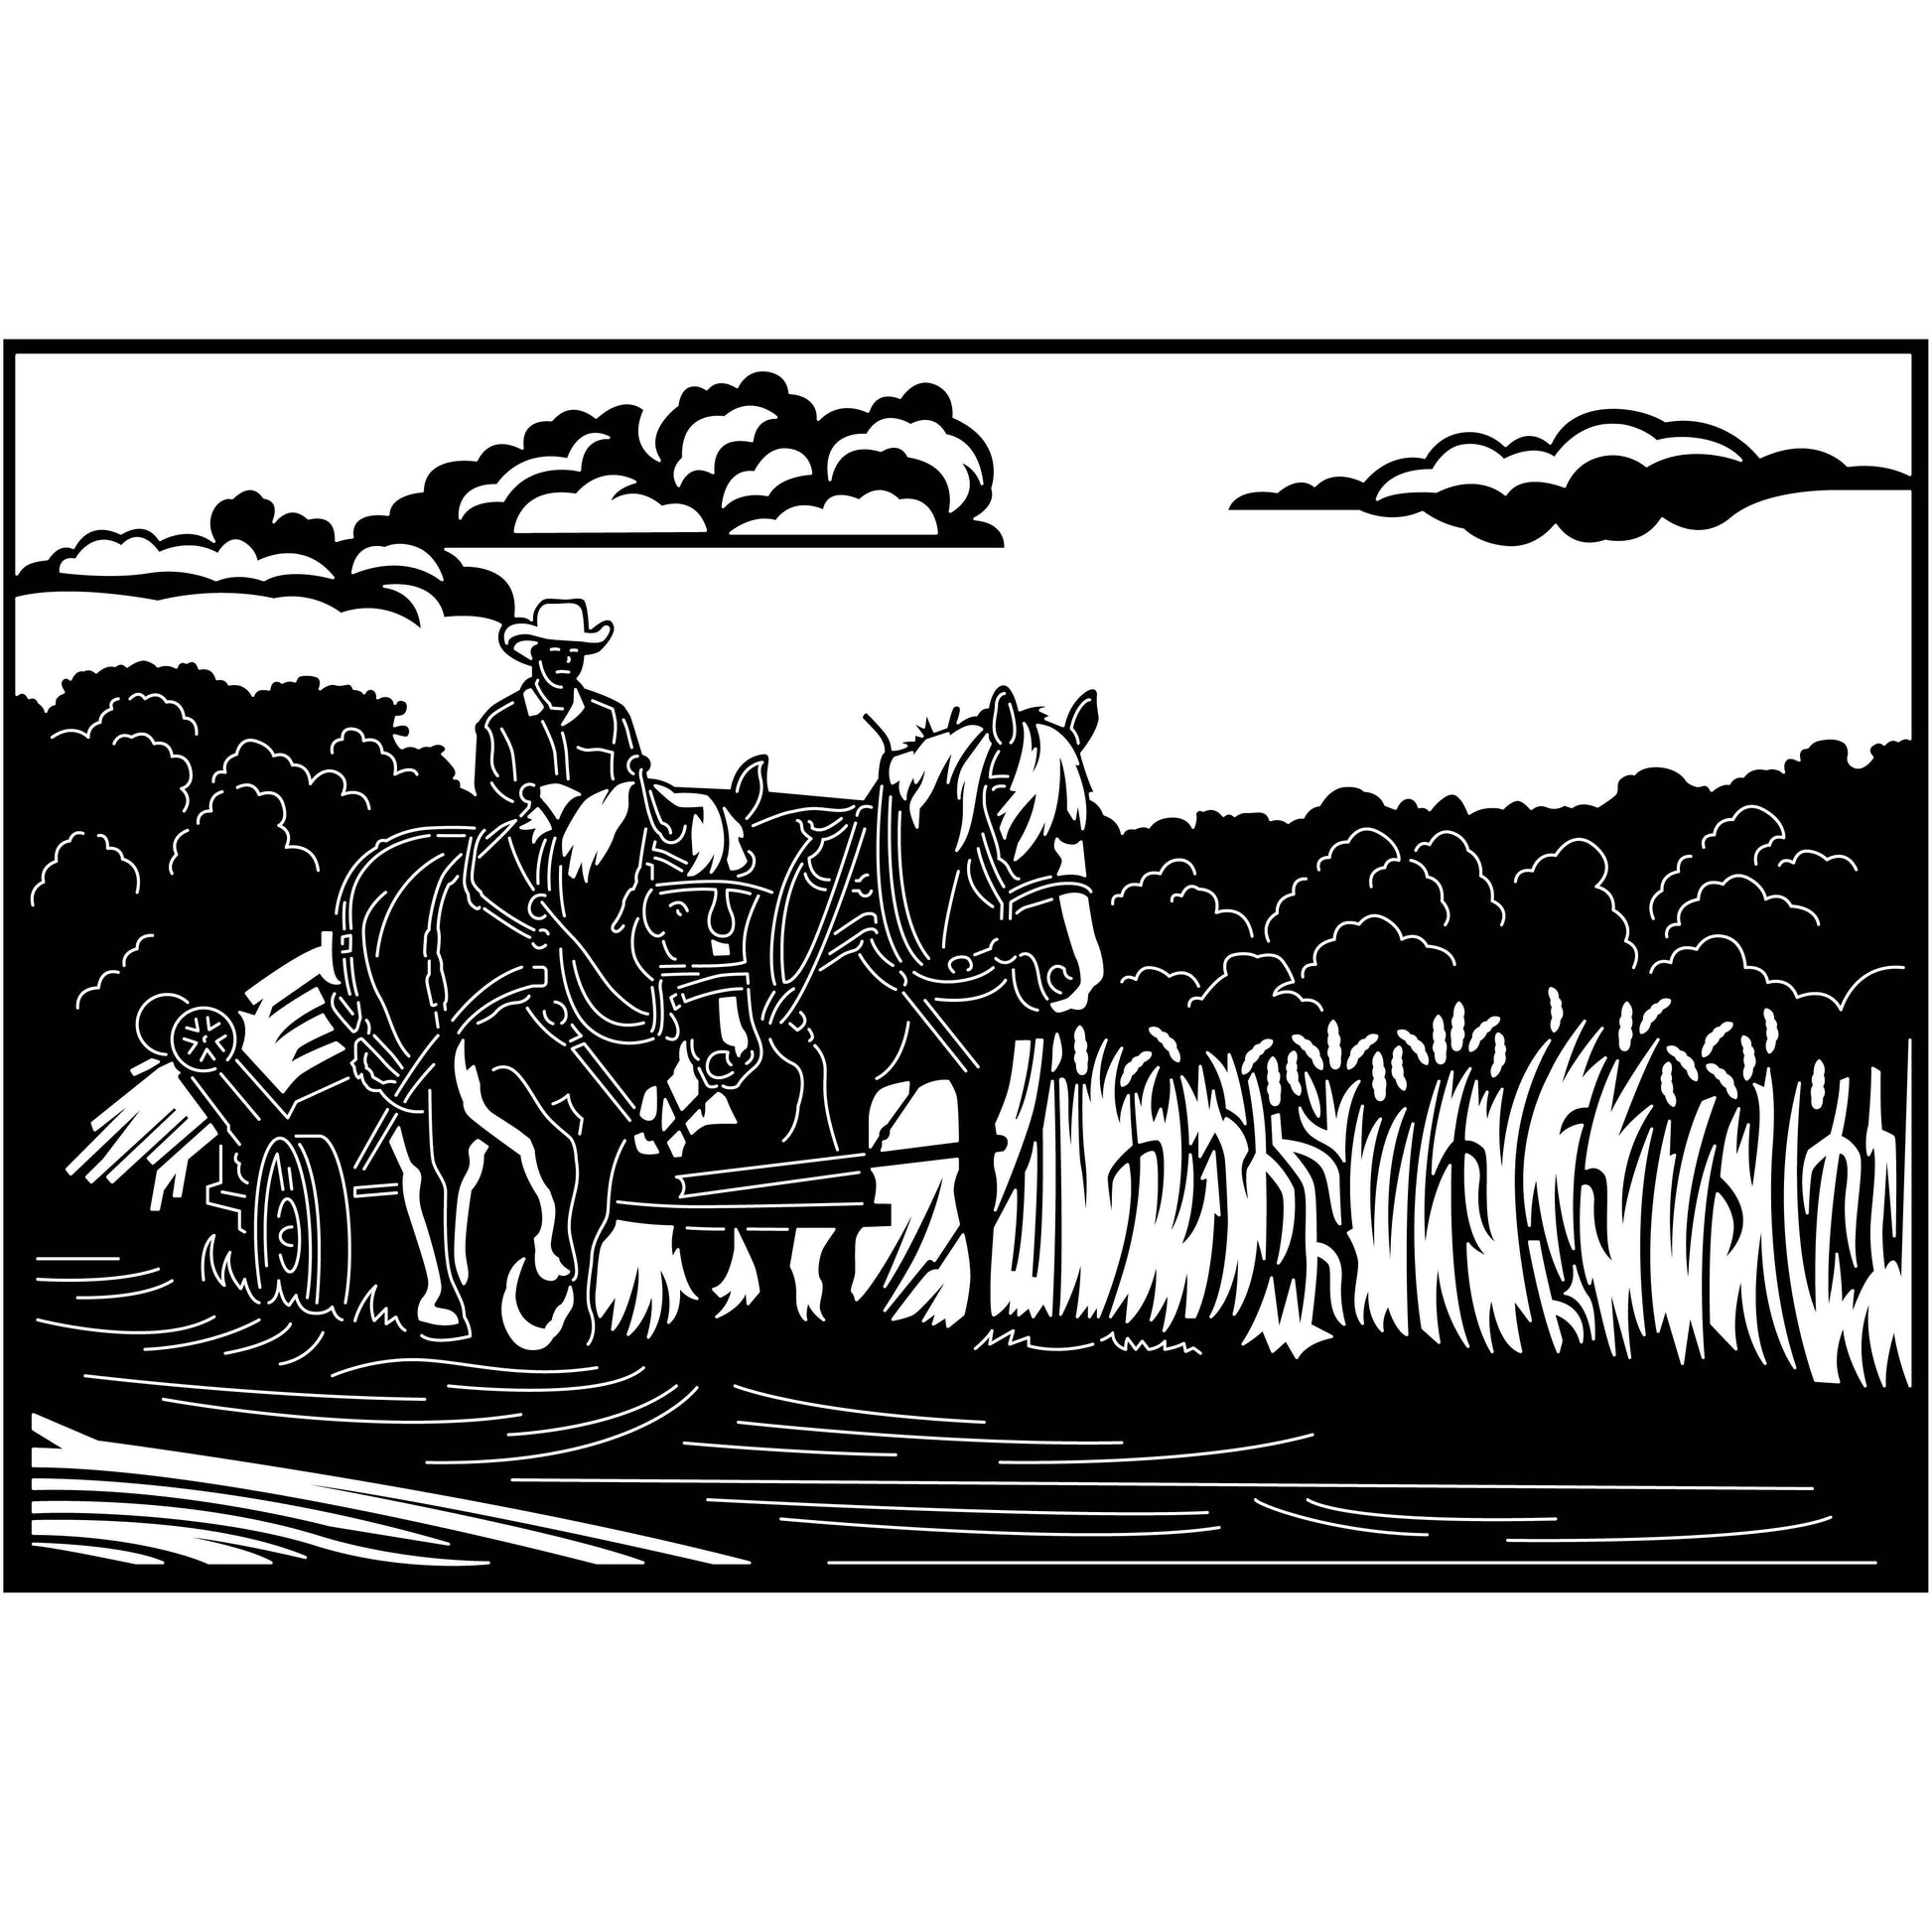 Farmer Plow Farms with Horses Scene-DXF files Cut Ready for CNC-DXFforCNC.com